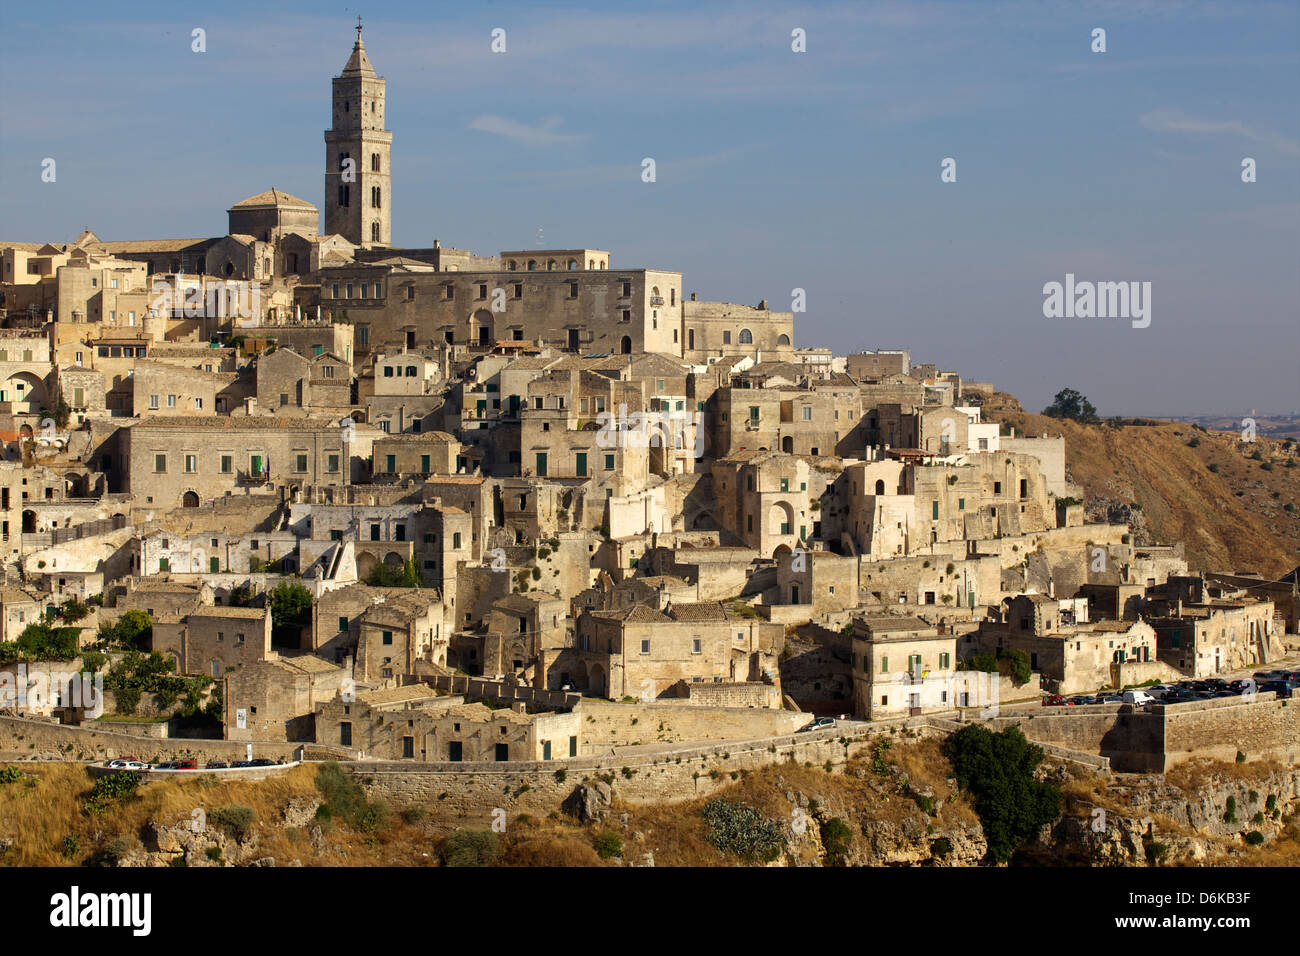 View of the Duomo and the Sassi of Matera, from the cliffside, Matera, Basilicata, Italy, Europe Stock Photo